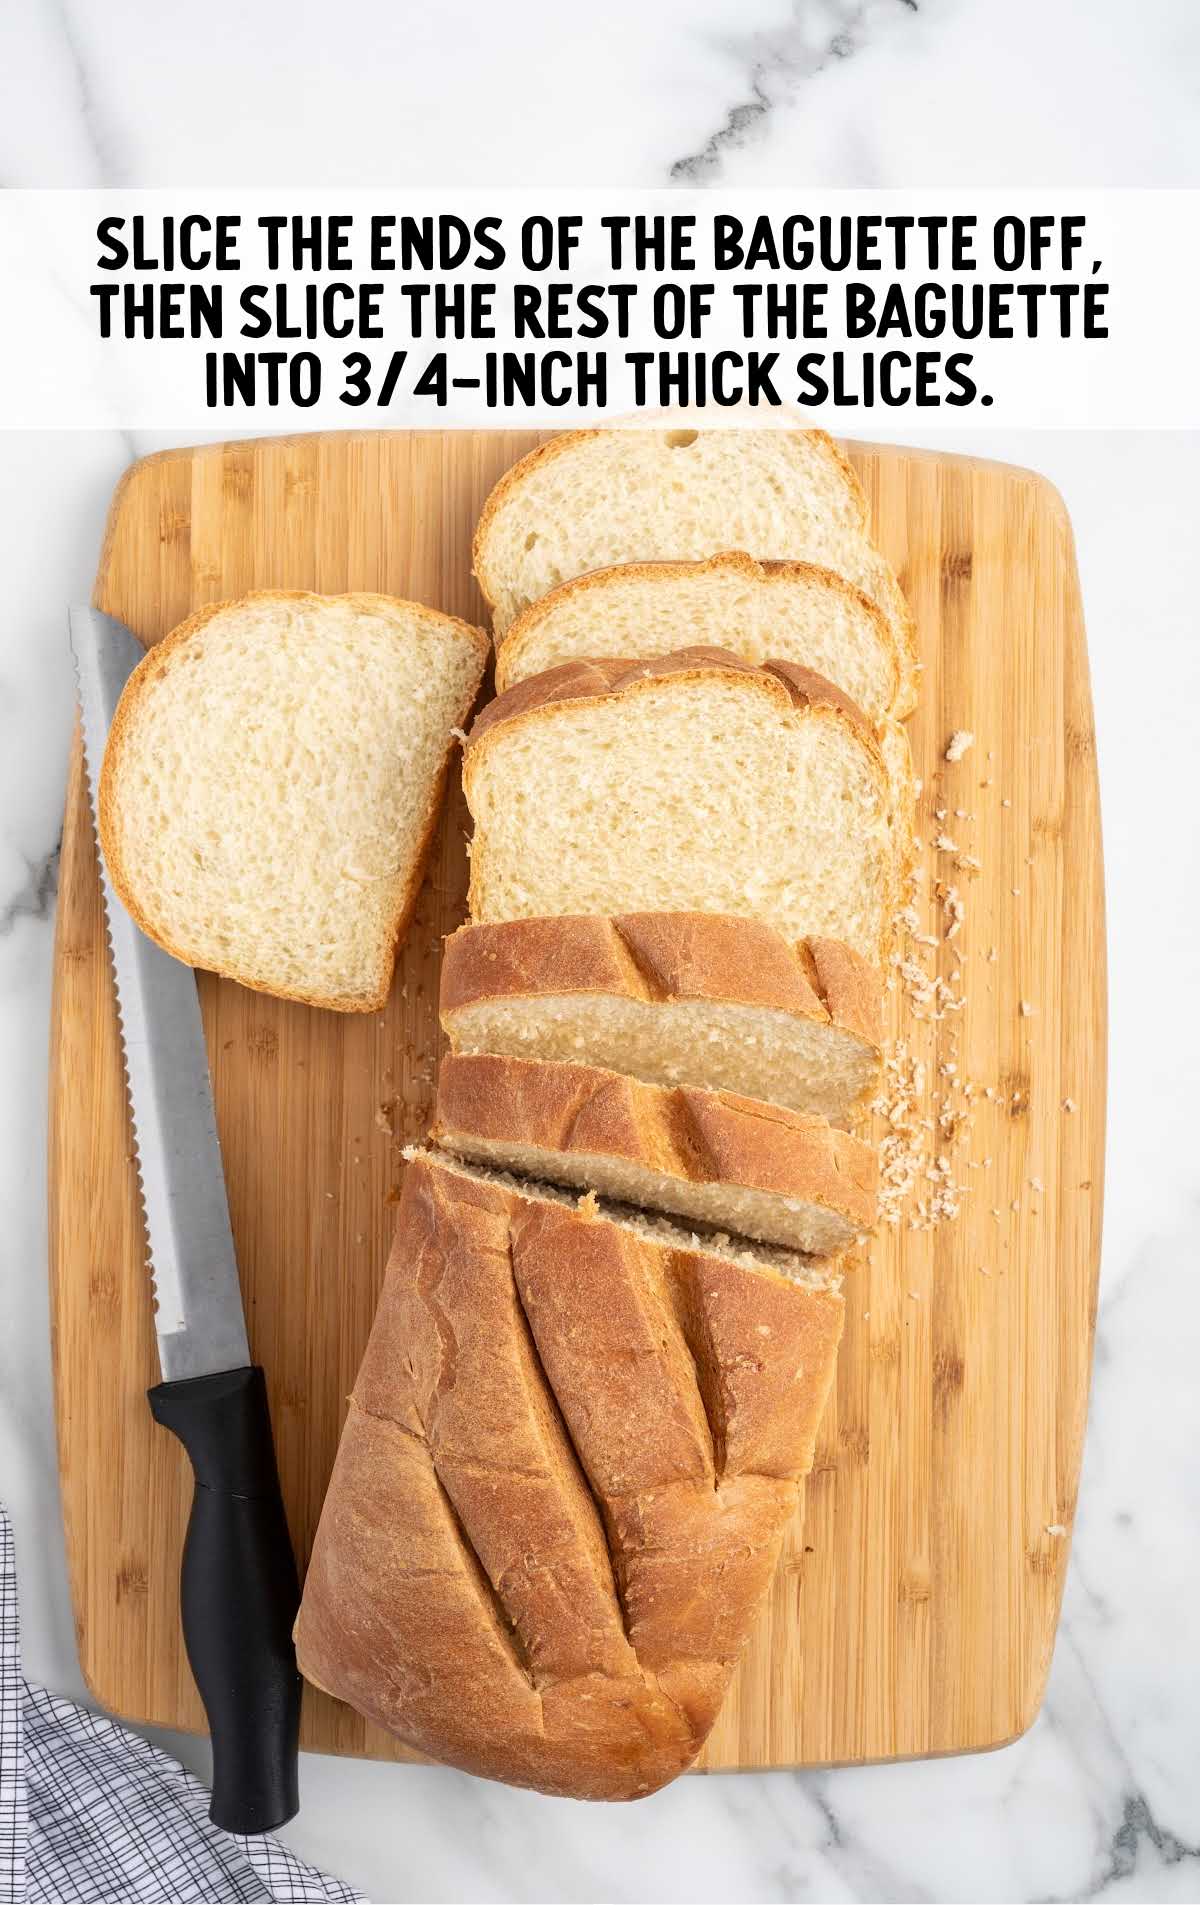 baguette sliced into ¾ inches thick sliced